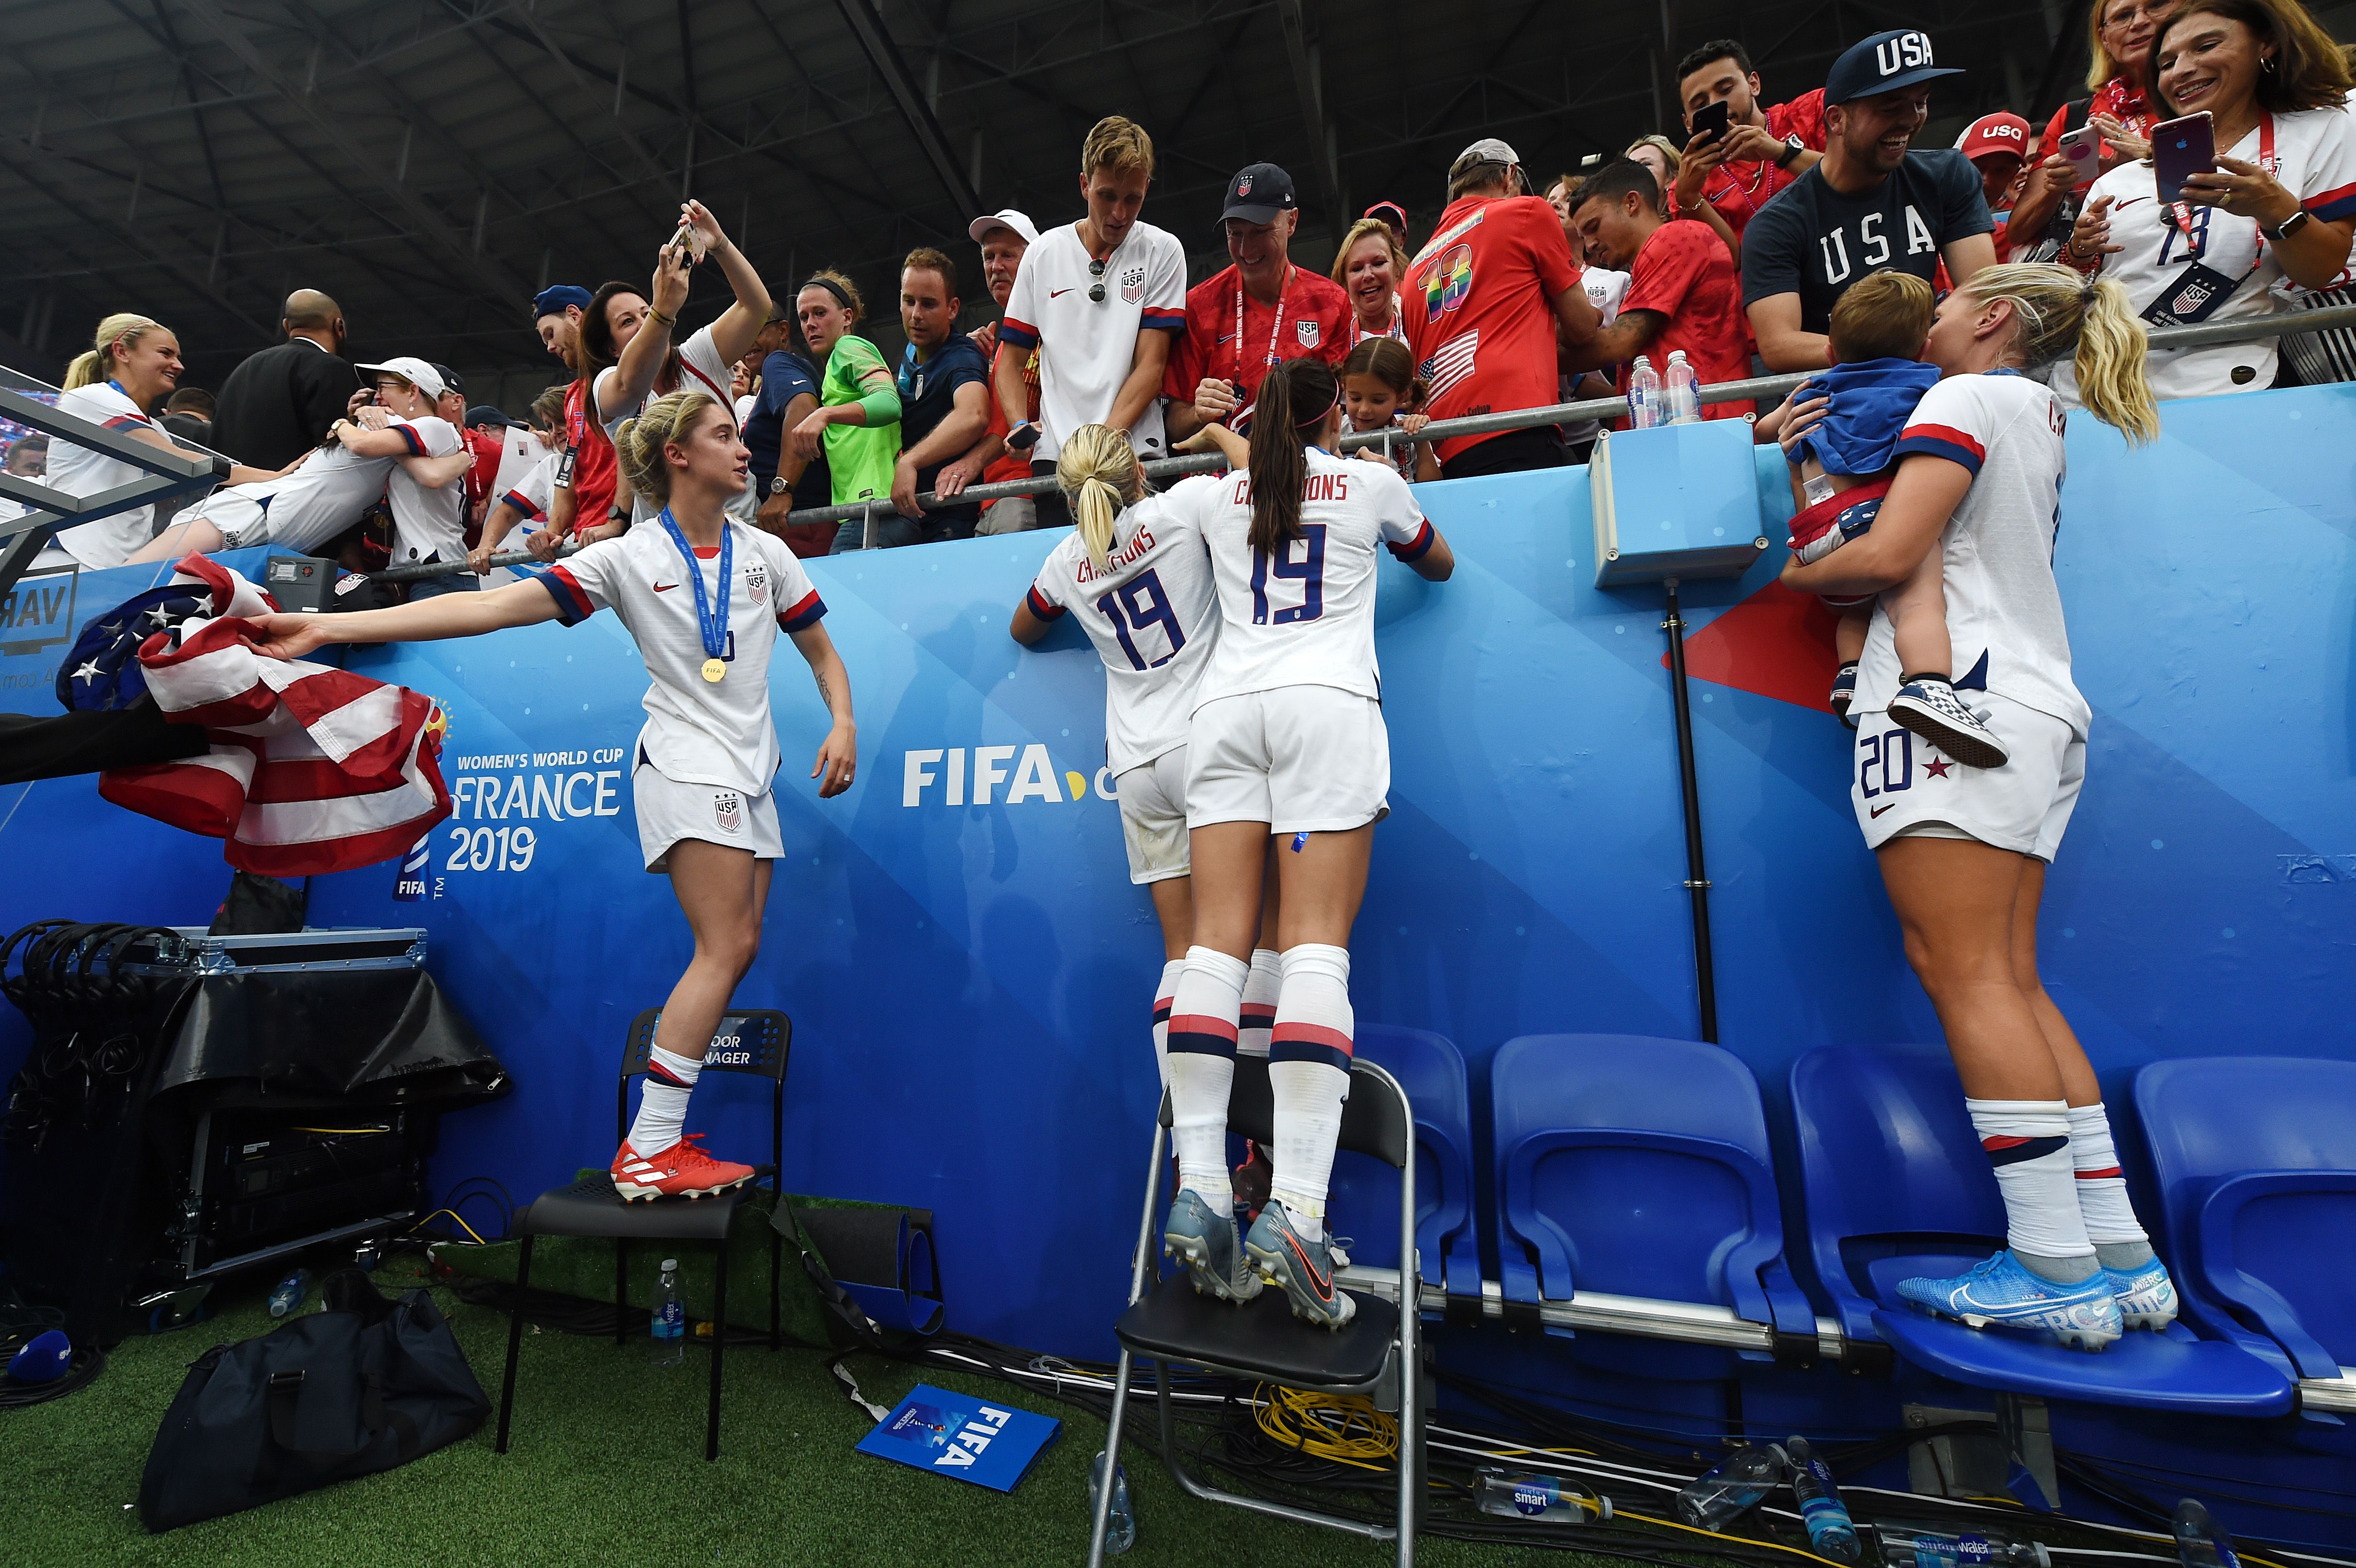 USA players celebrate victory with family and friends in the crowd after the 2019 FIFA Women's World Cup France Final match between The United States of America and The Netherlands at Stade de Lyon.